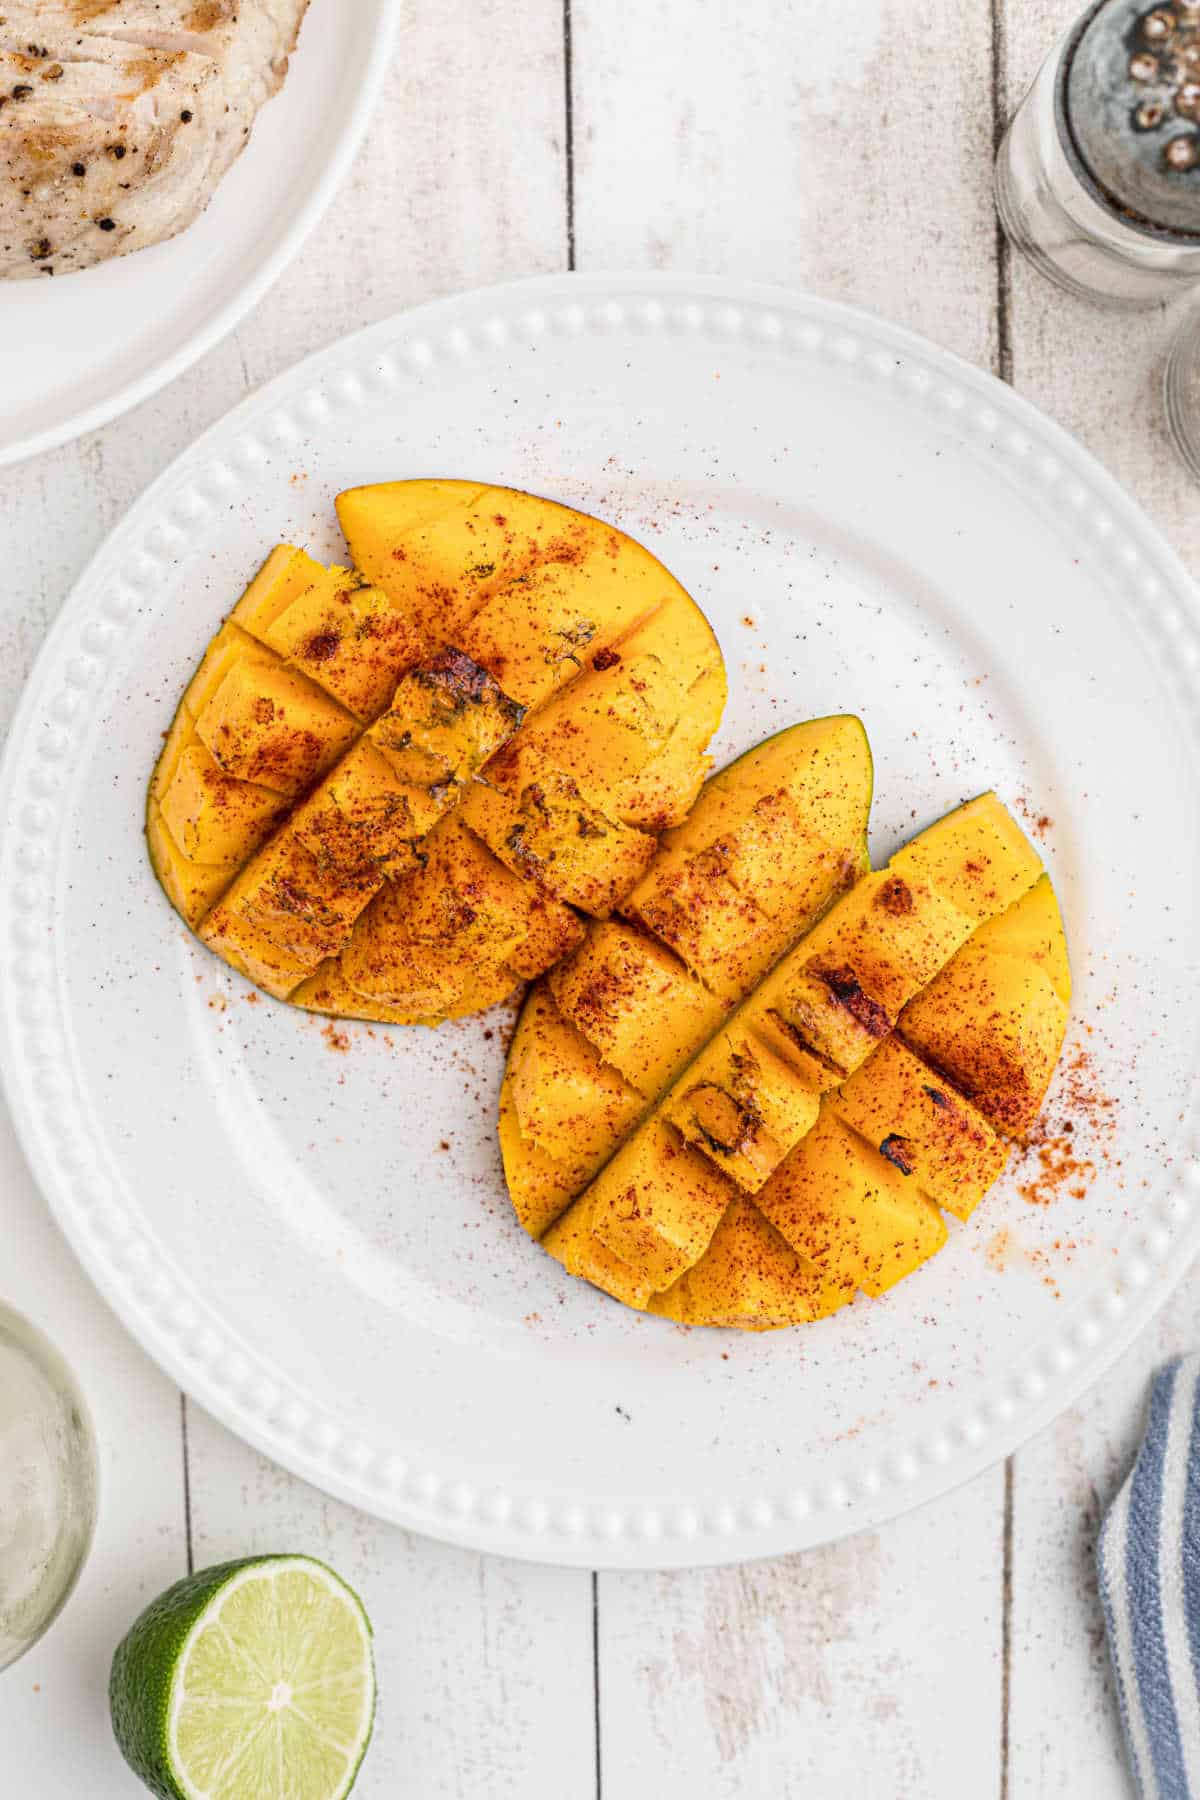 Two halves of grilled mango on a plate.